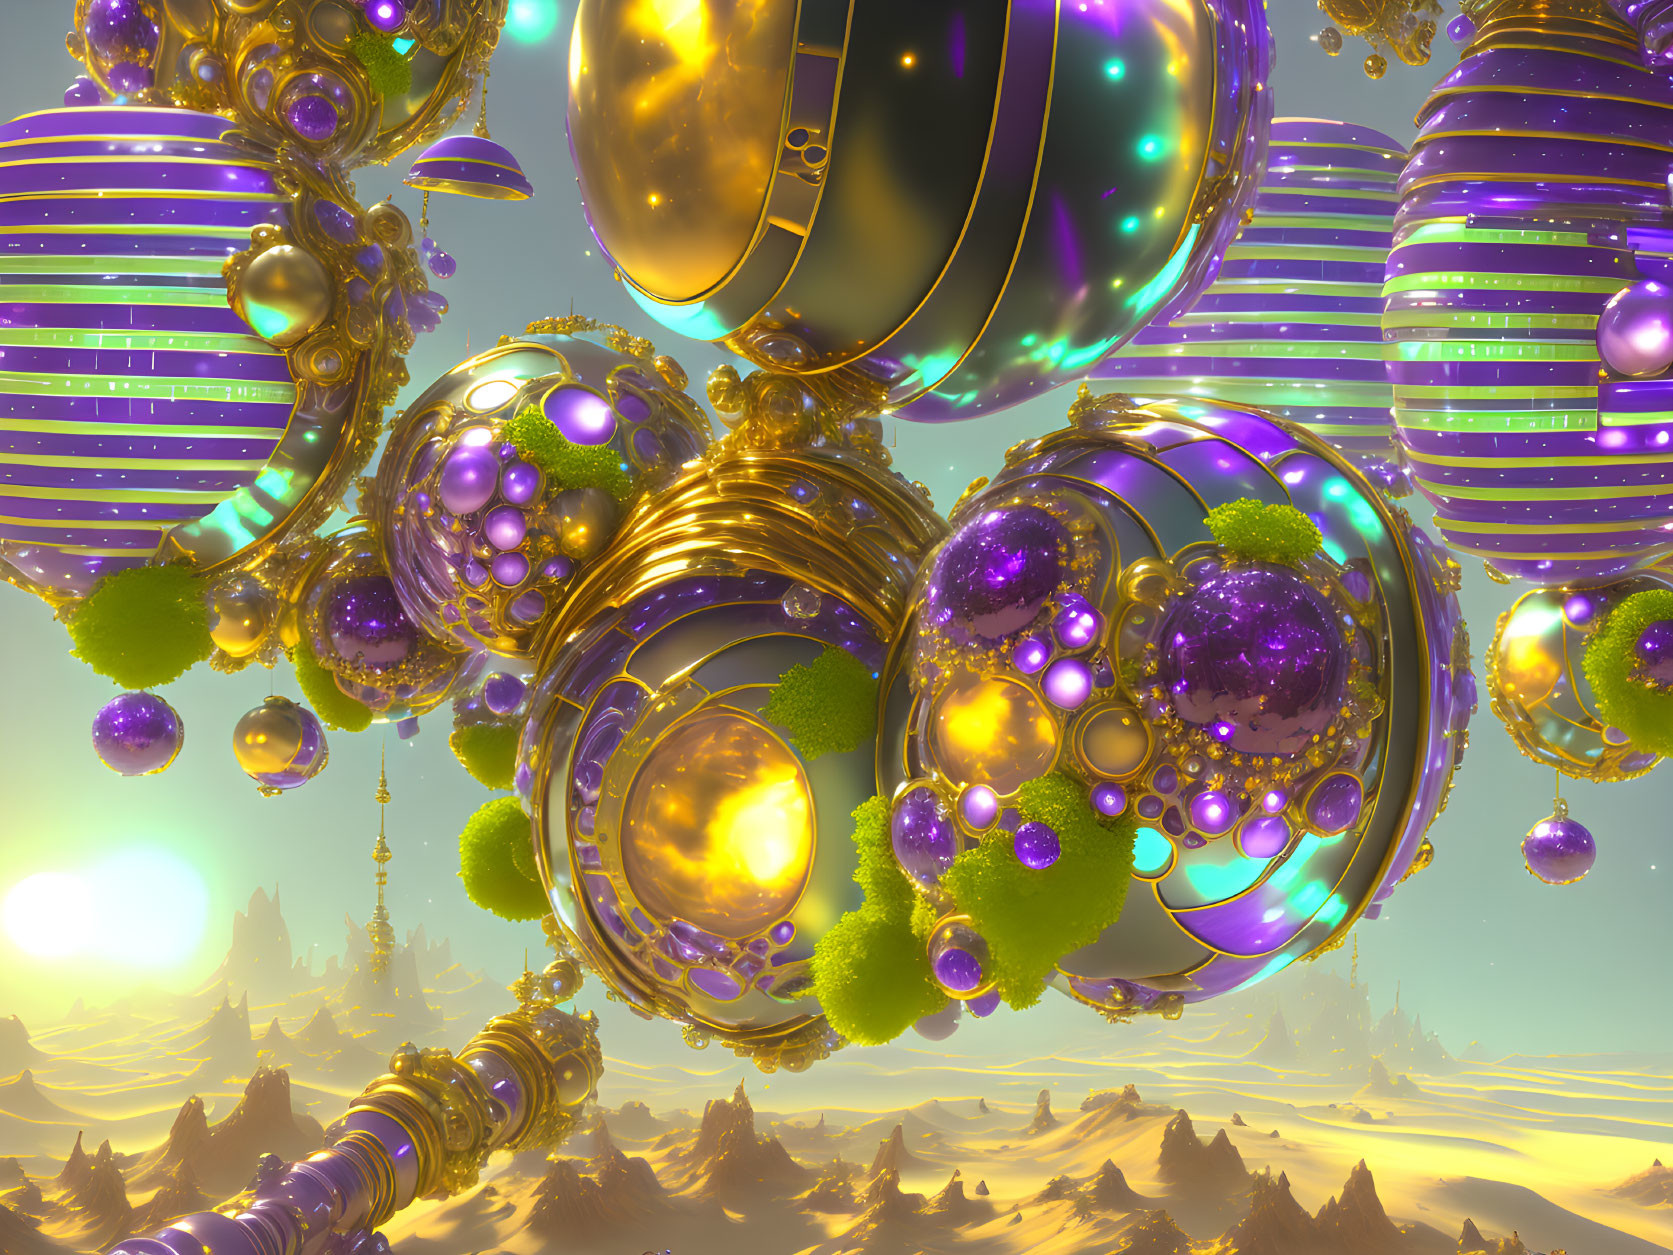 Colorful 3D render of shiny spherical structures in purple and gold hues above a golden landscape